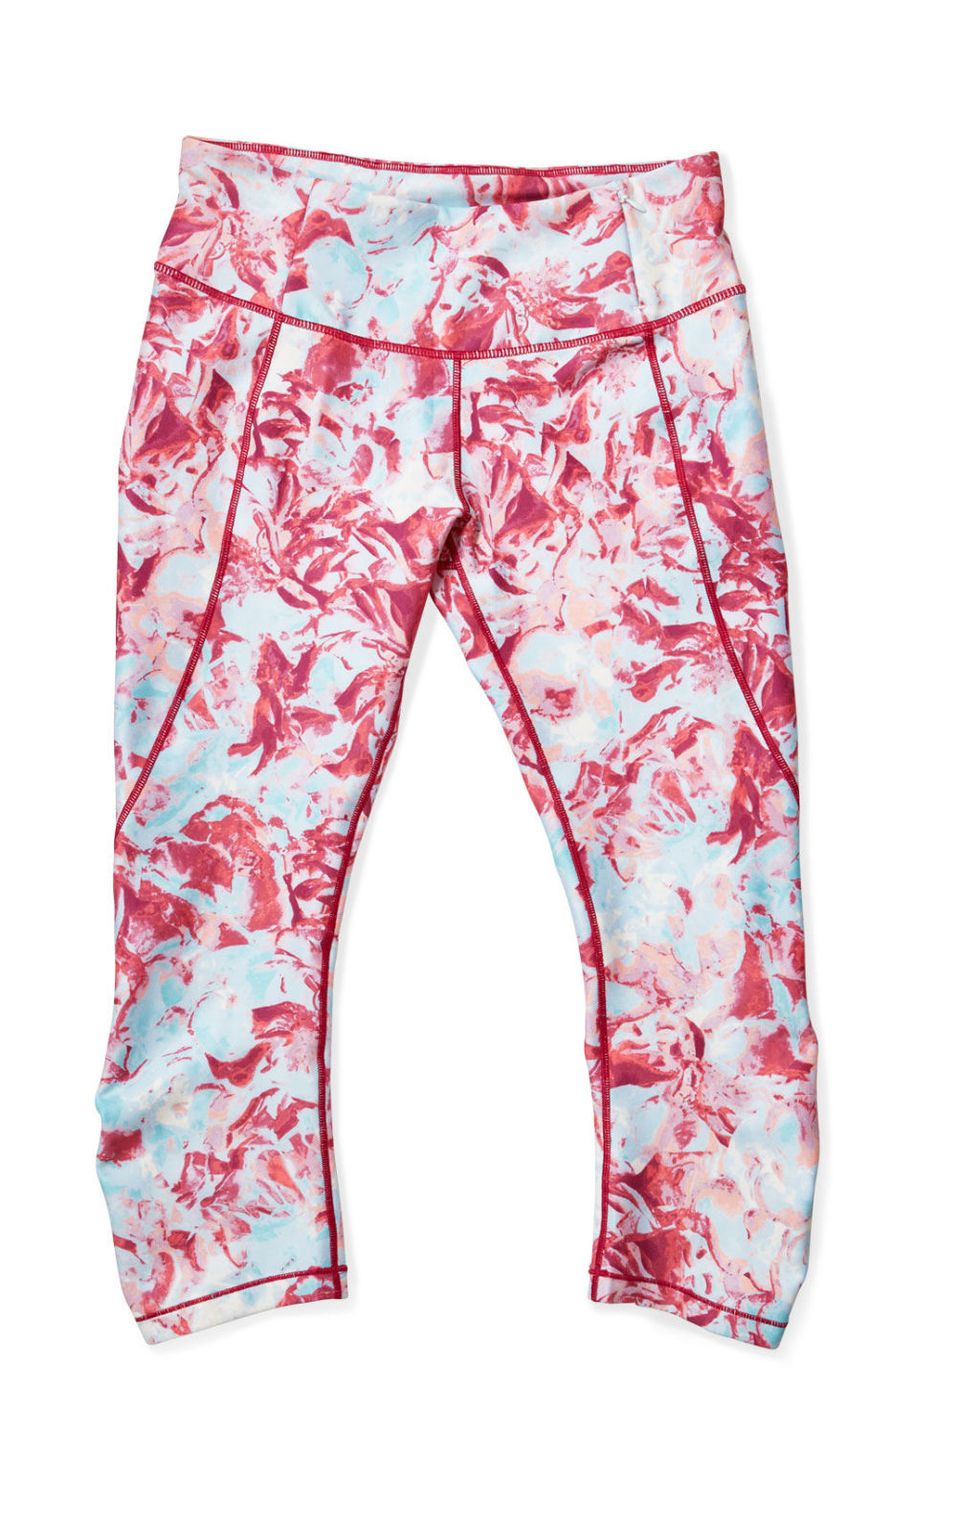 Calia by Carrie Underwood Floral Multi Color Pink Leggings Size XL